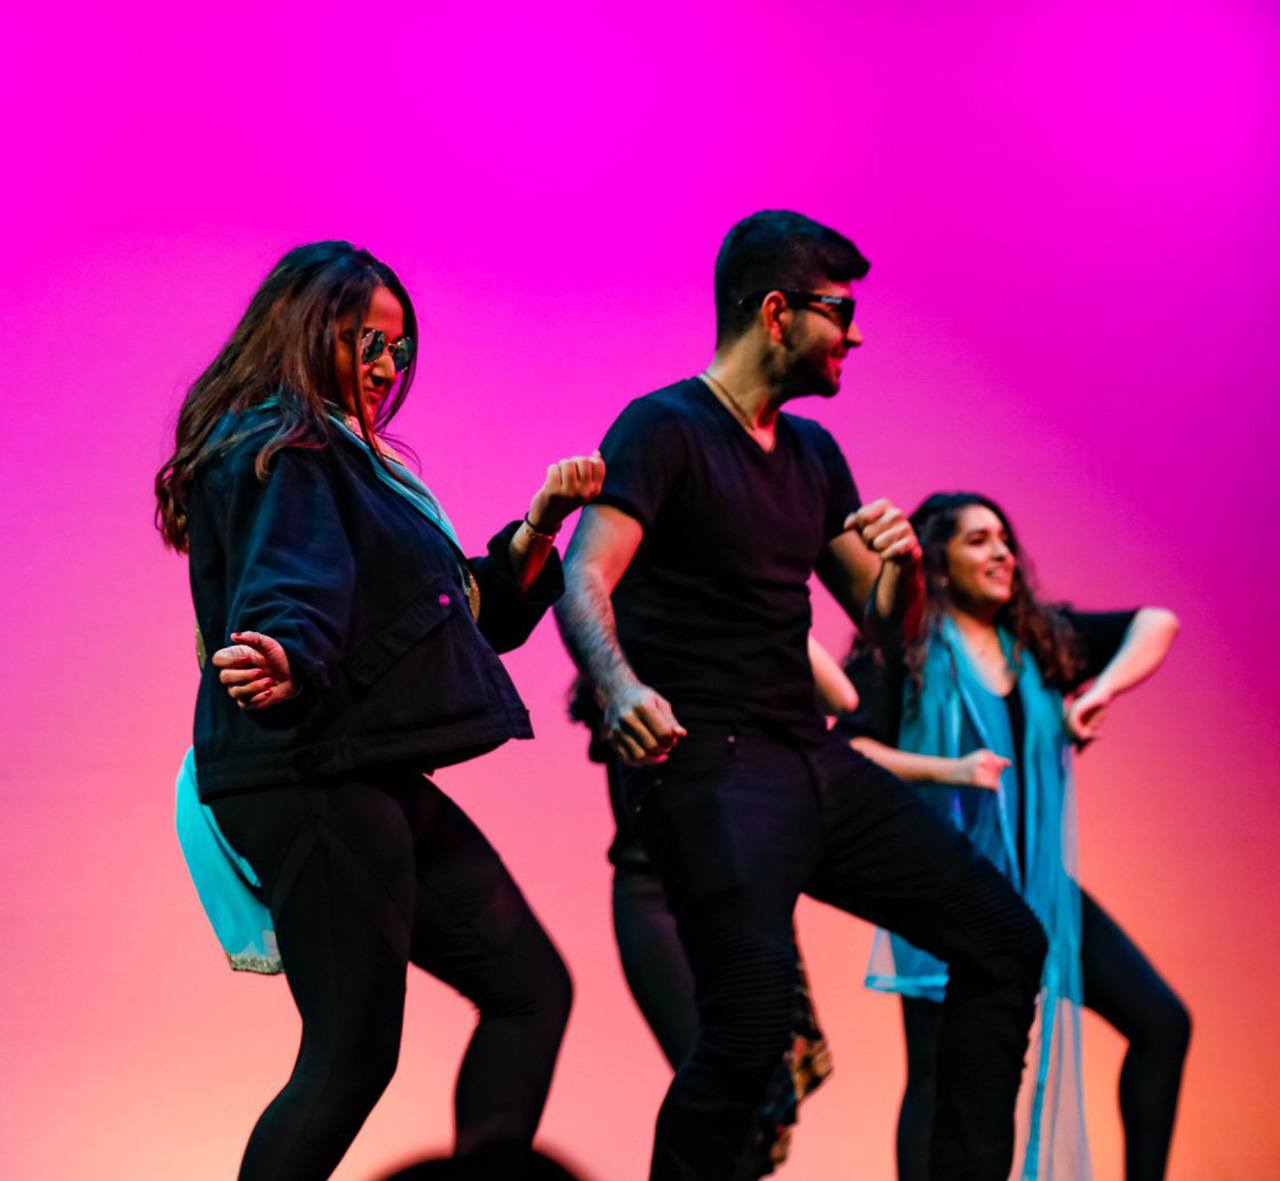 Students dancing on stage in Monsoon event. They are wearing dark clothing, sunglasses, and bright blue scarves.